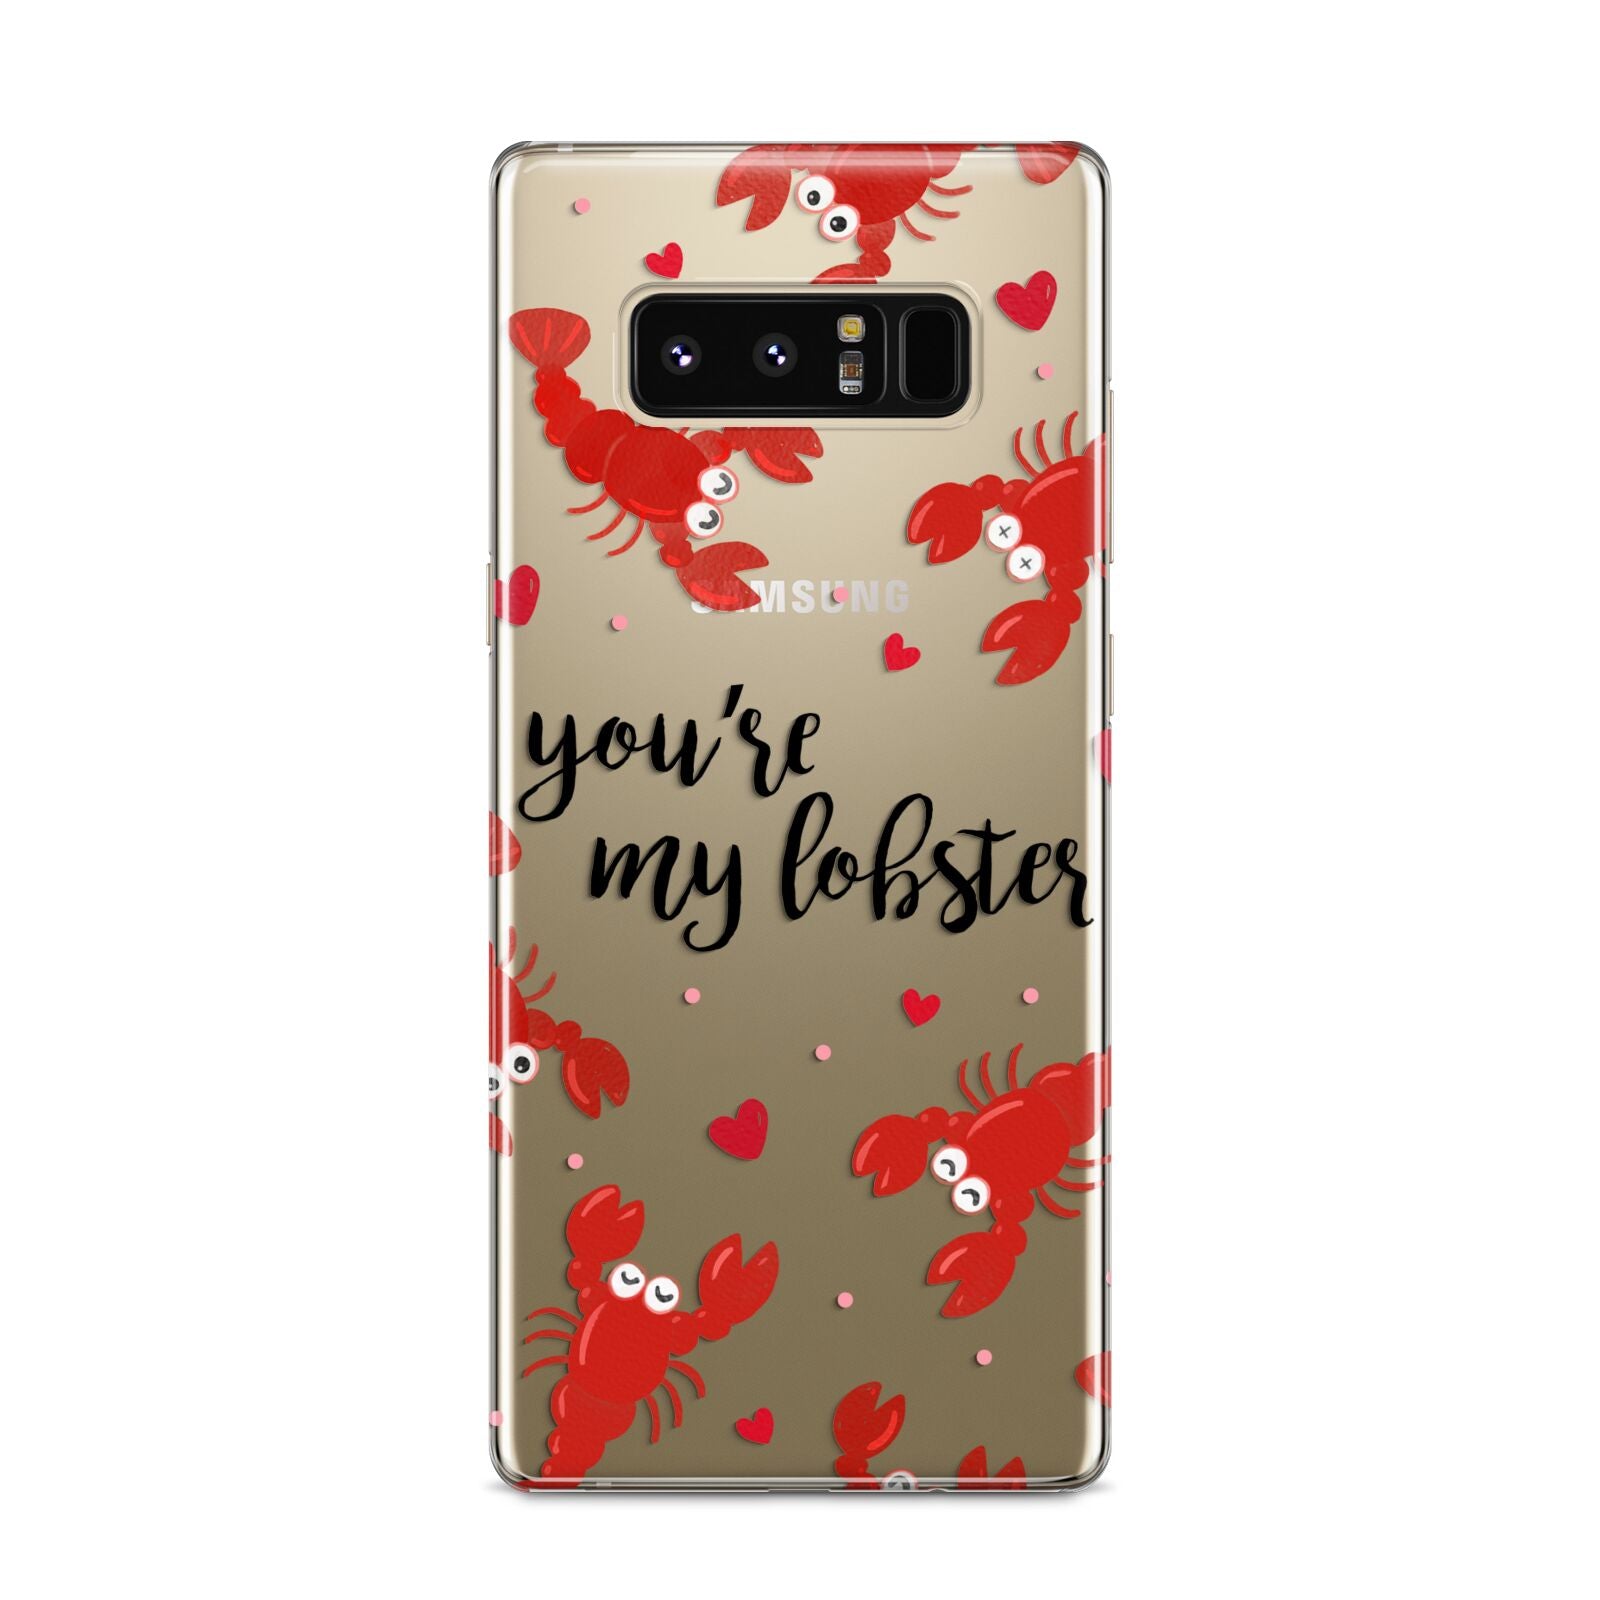 Youre My Lobster Samsung Galaxy S8 Case